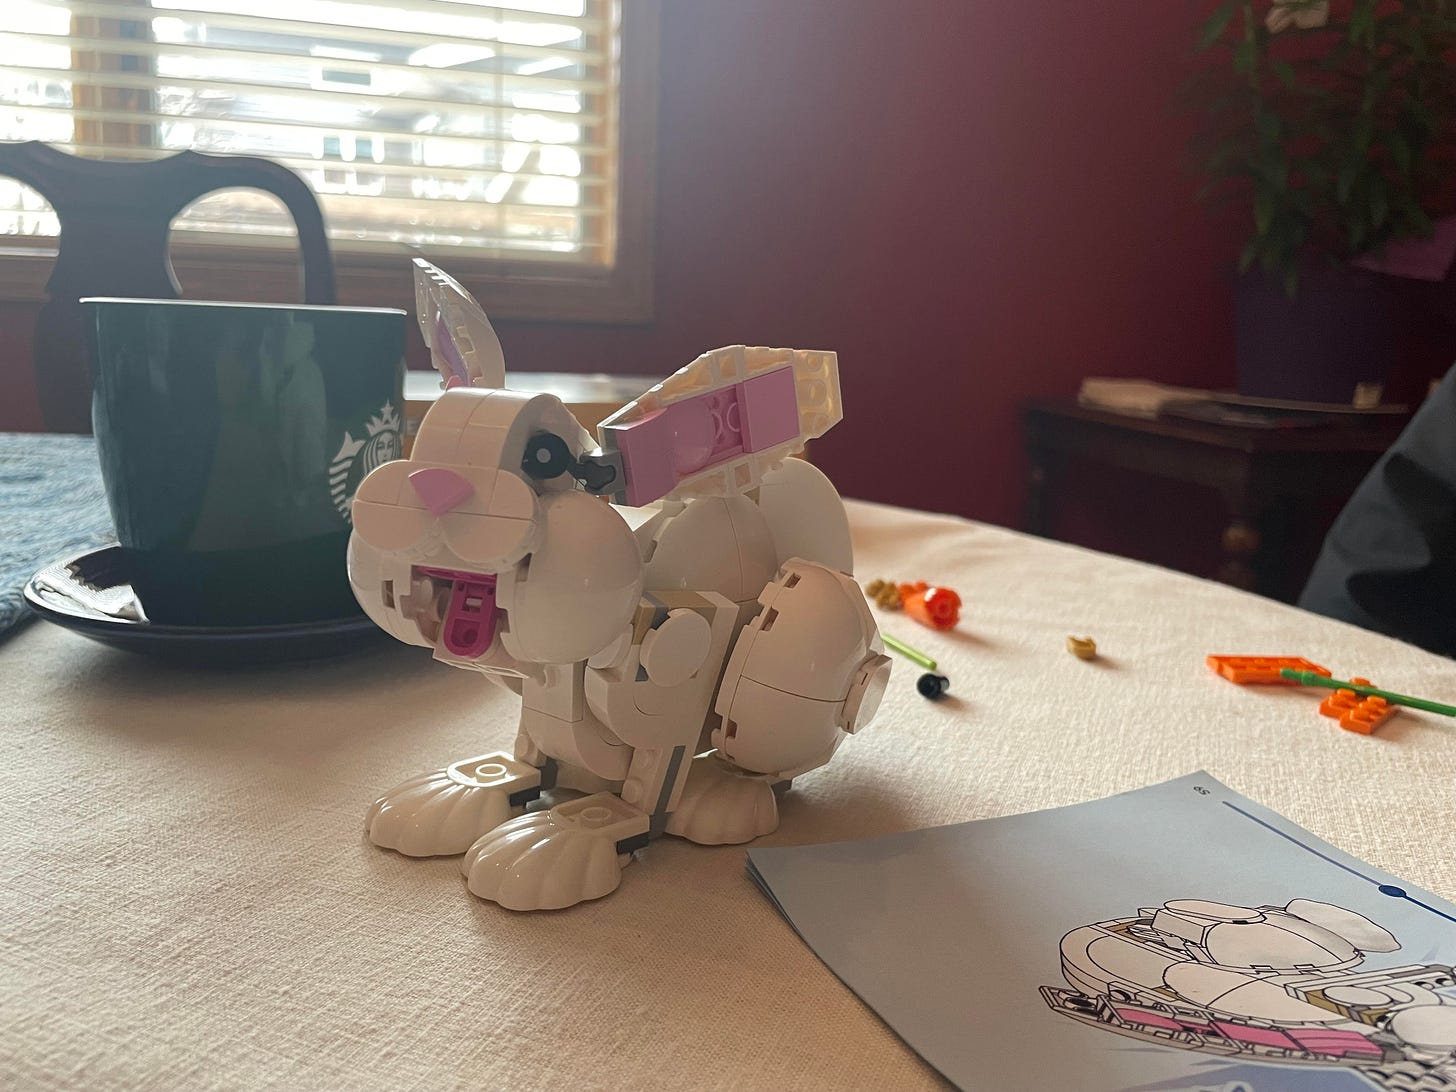 A completed LEGO rabbit sits on a table near a cup of coffee